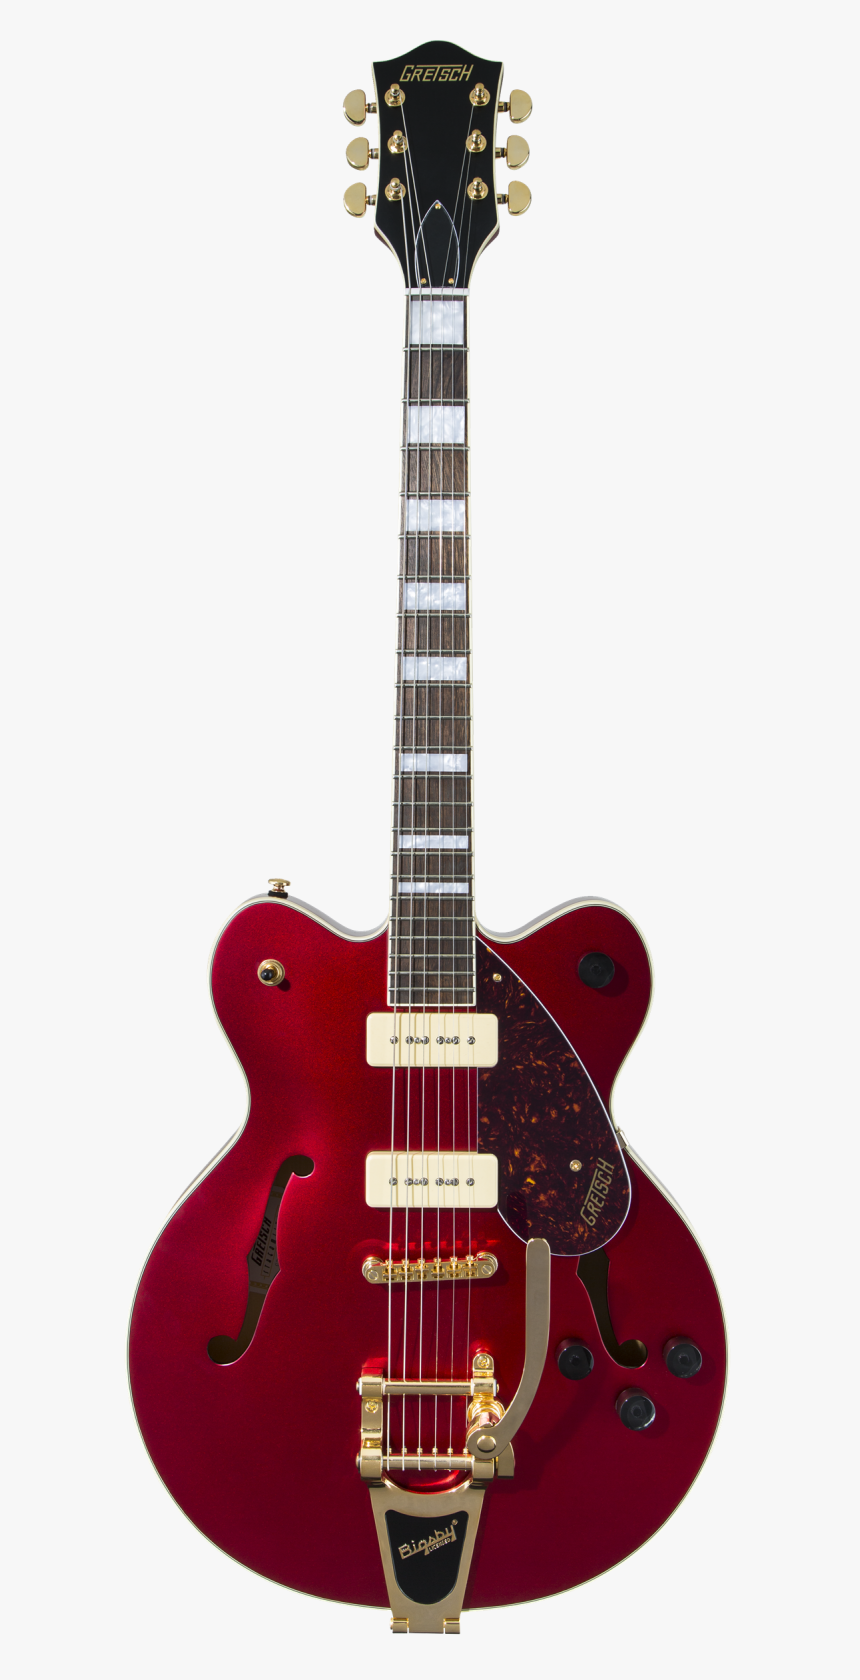 Gretsch G2622tg-p90 Limited Edition Streamliner Center - 5622 T Guitar Gretsch, HD Png Download, Free Download